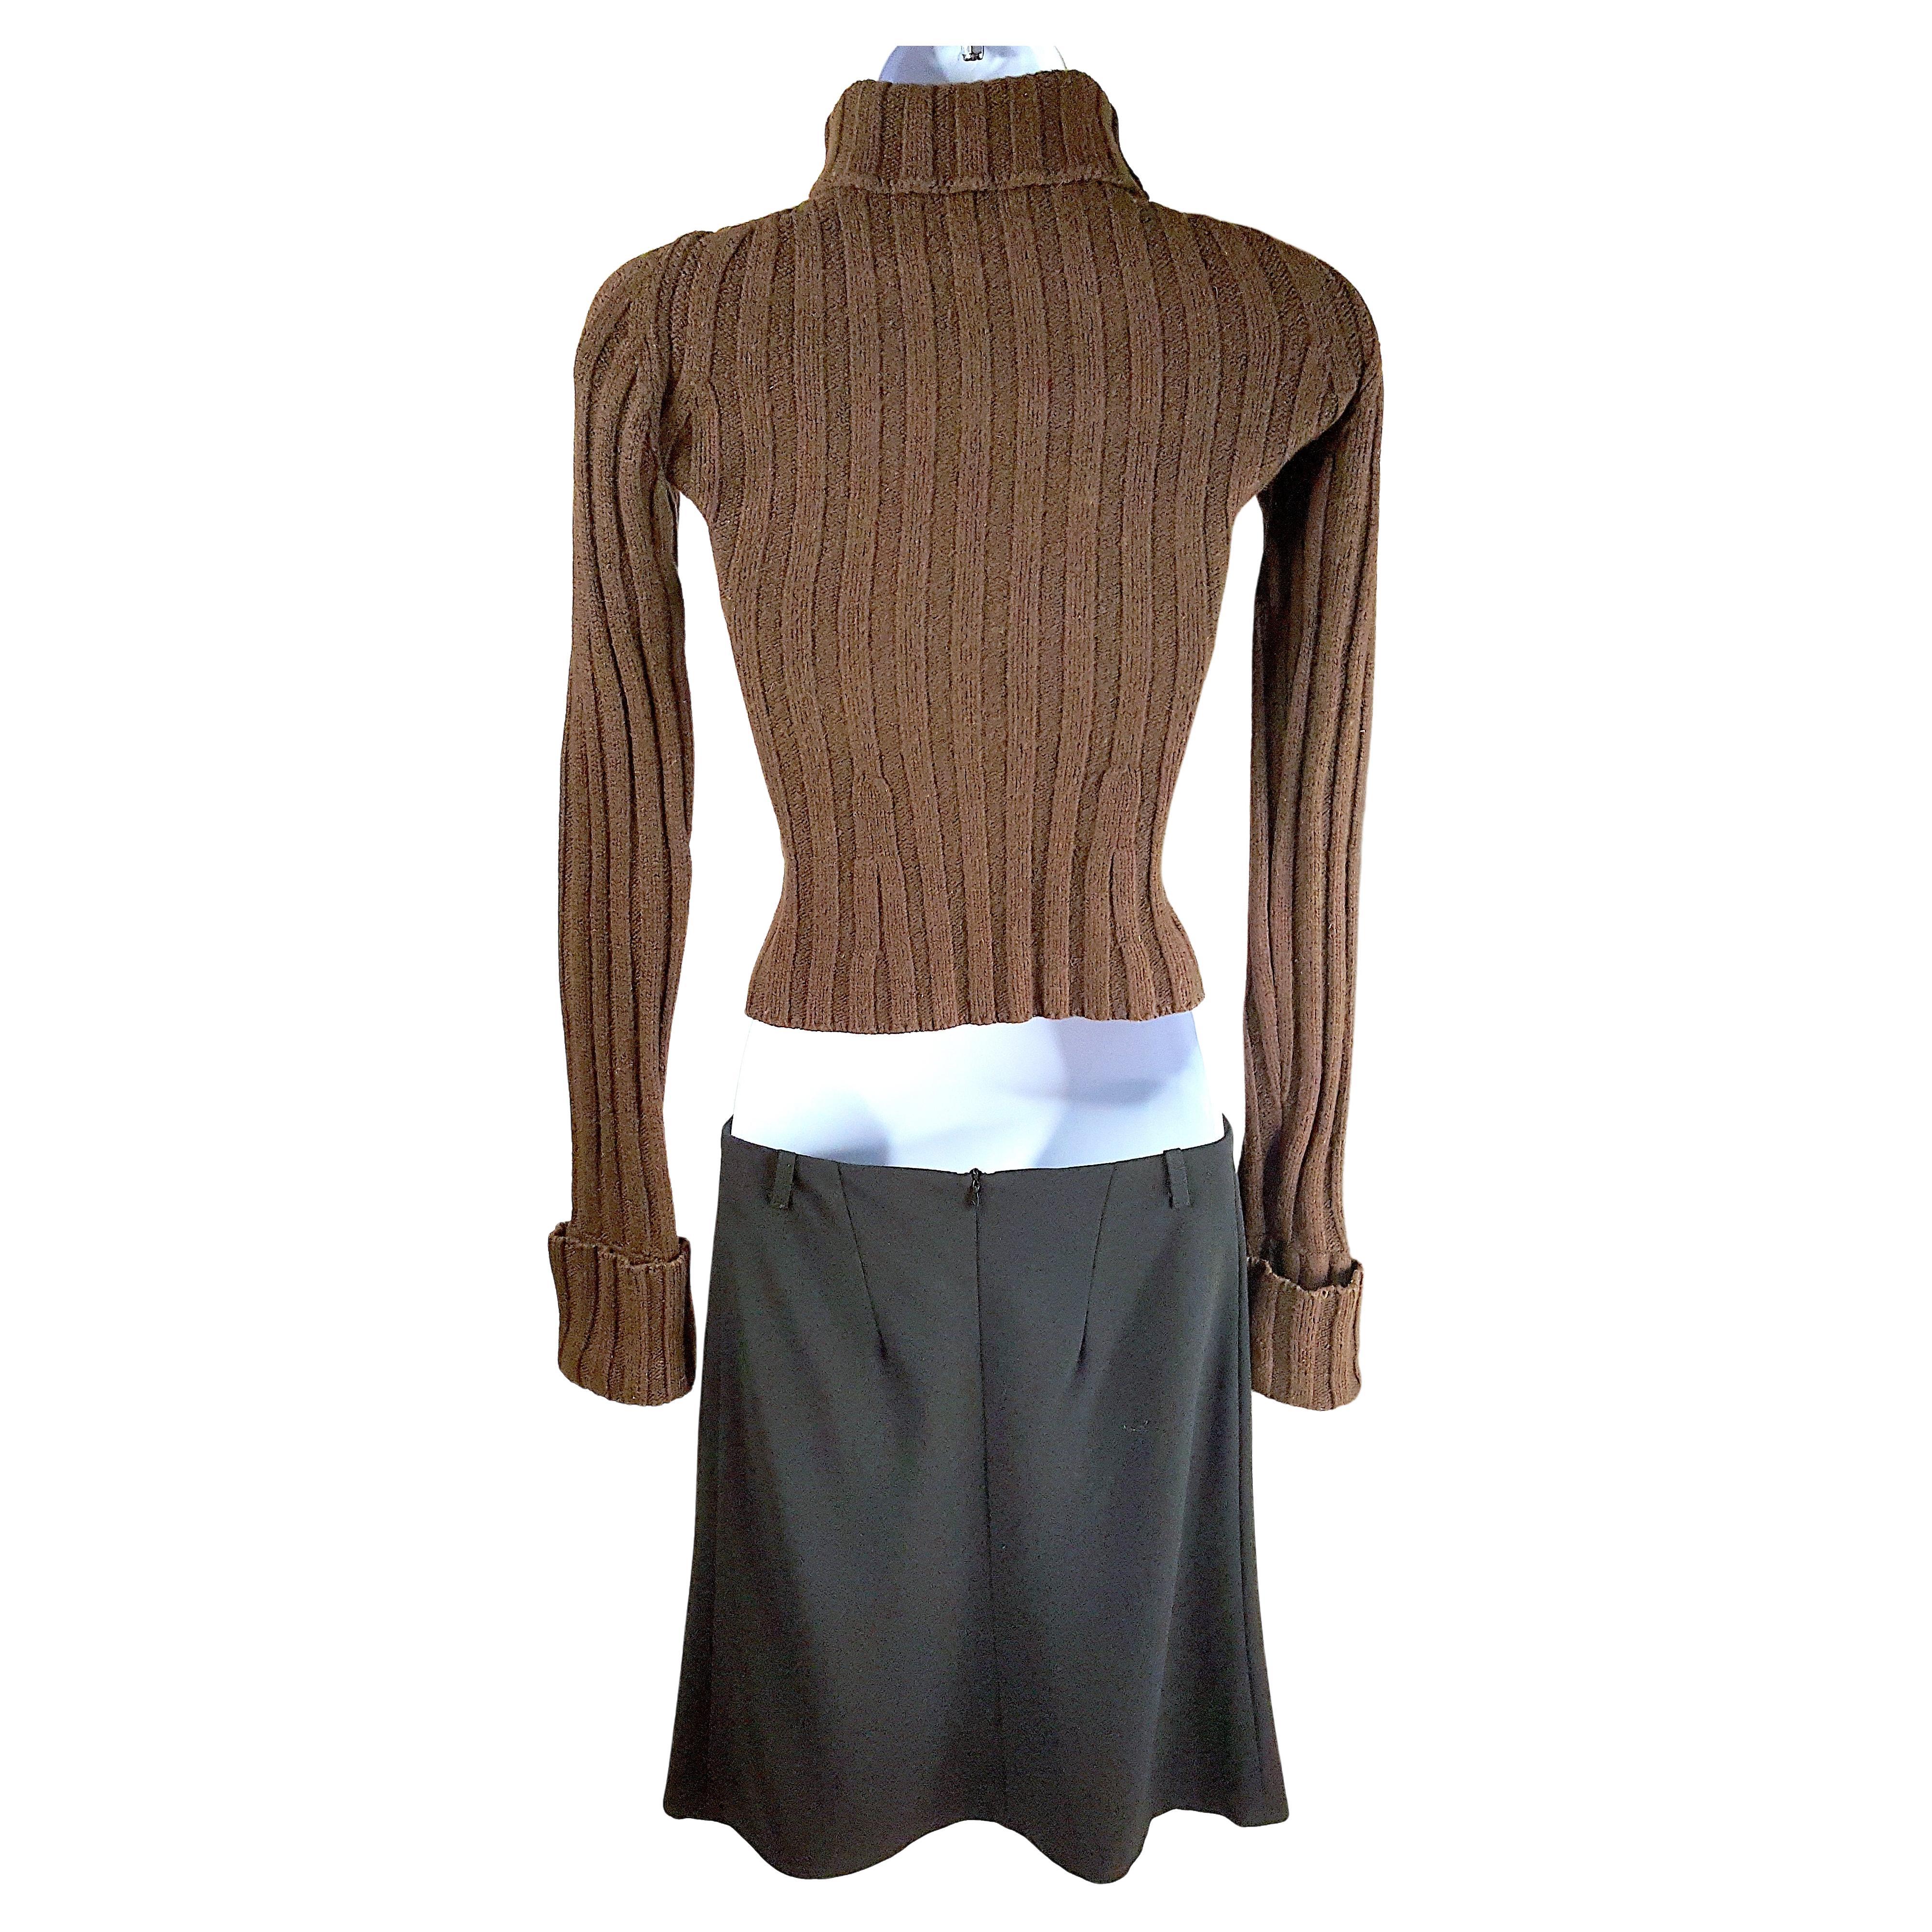 AnnDemeulemeester 1996 Wool Set RibbedHighNeckKnit & BiasCut LowWaistMiniSkirt  In Excellent Condition For Sale In Chicago, IL